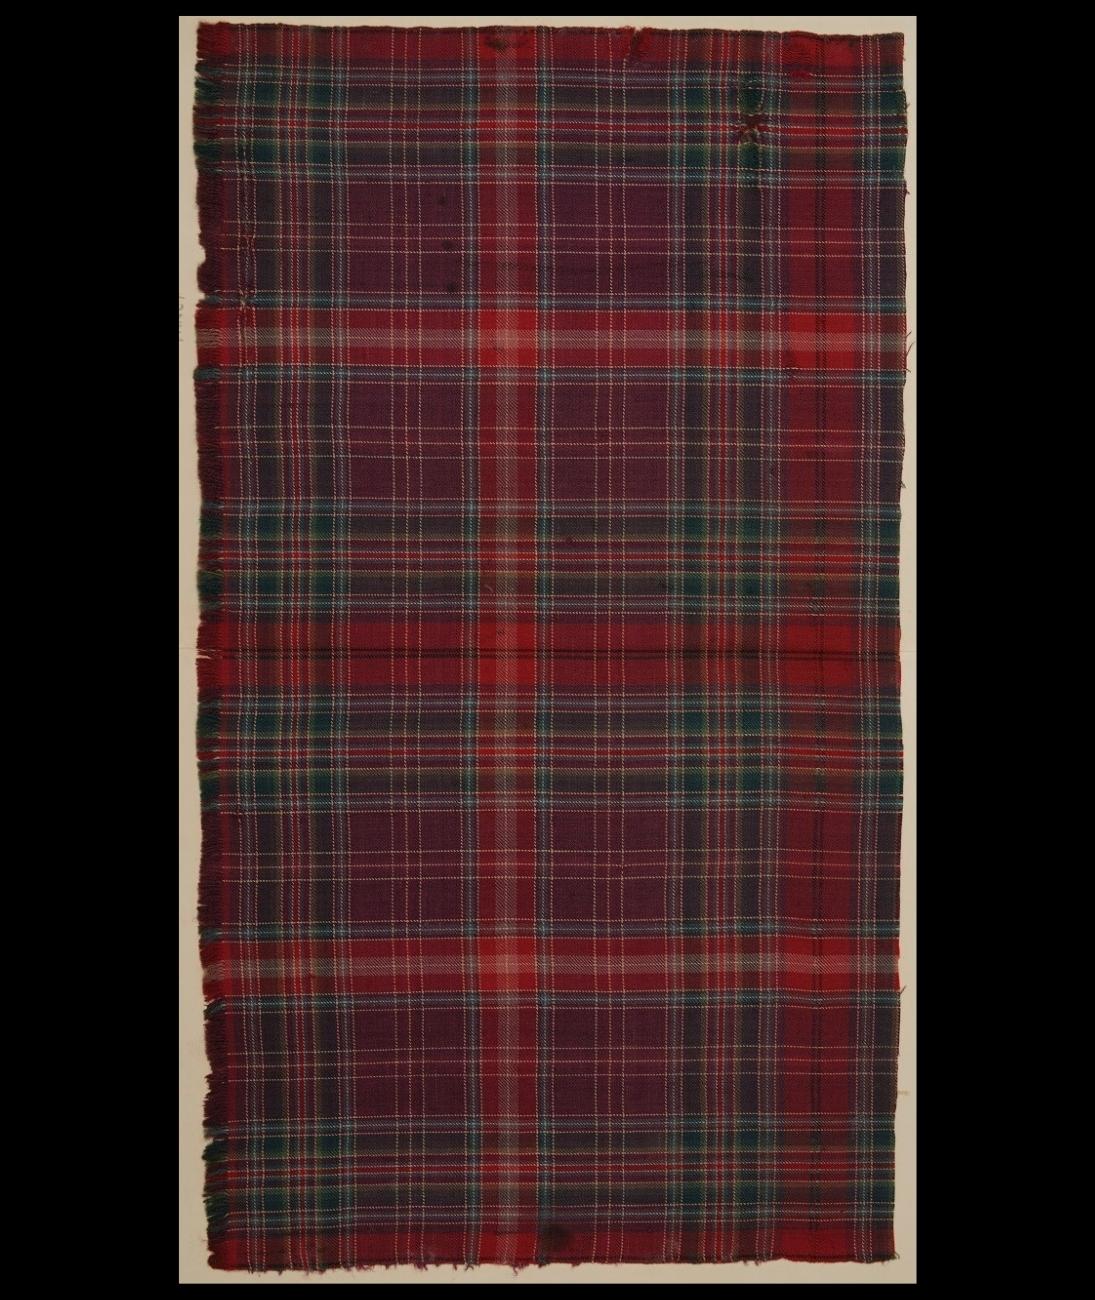 A piece of ‘fancy’ tartan, c.1790. The pattern uses 8 solid colours to create a busy cloth of 36 interweaving shades (H.TTC 1.1)